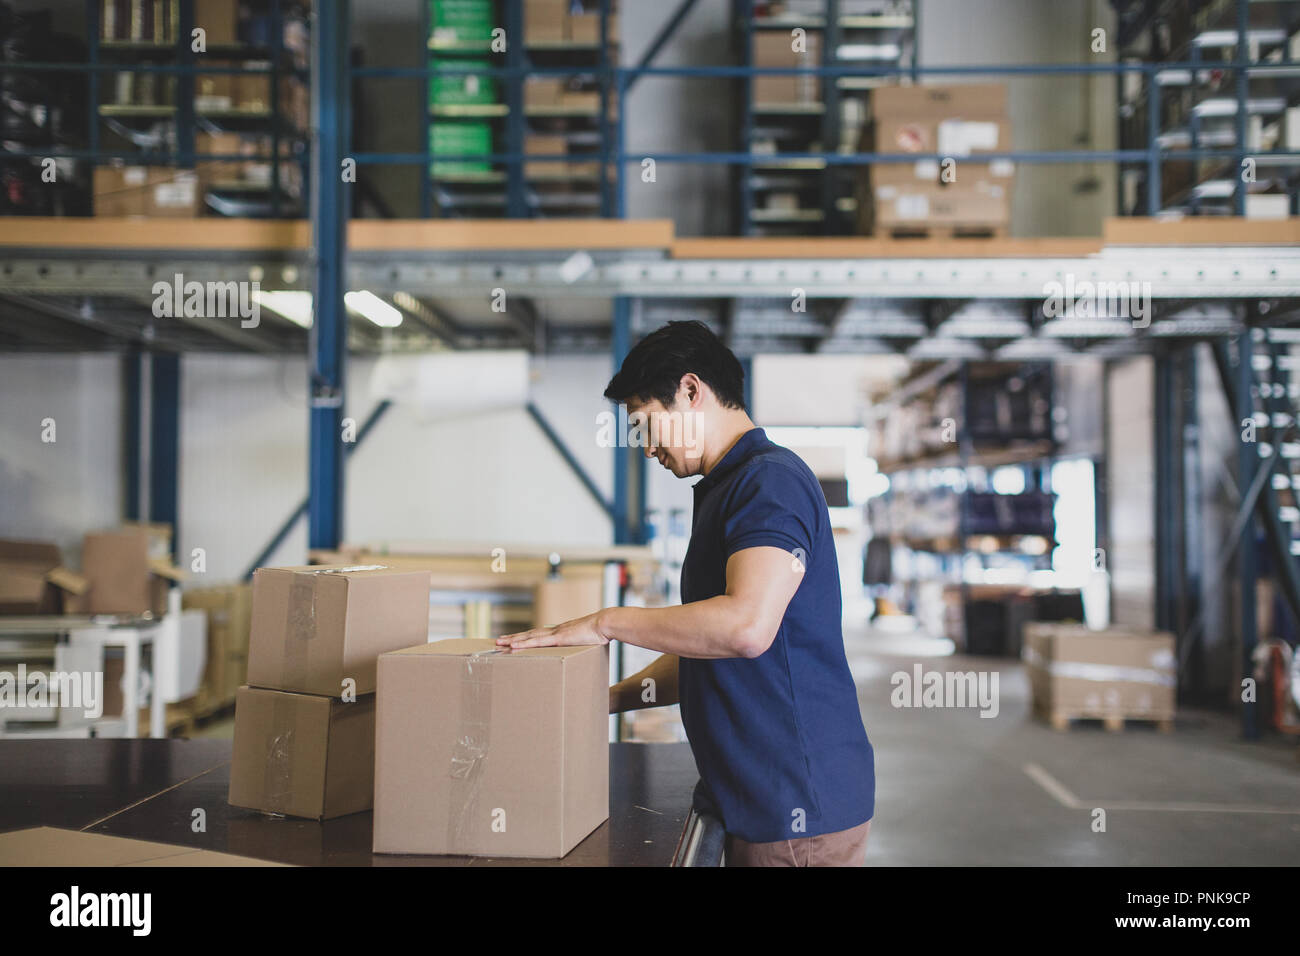 Male working in packing warehouse Stock Photo